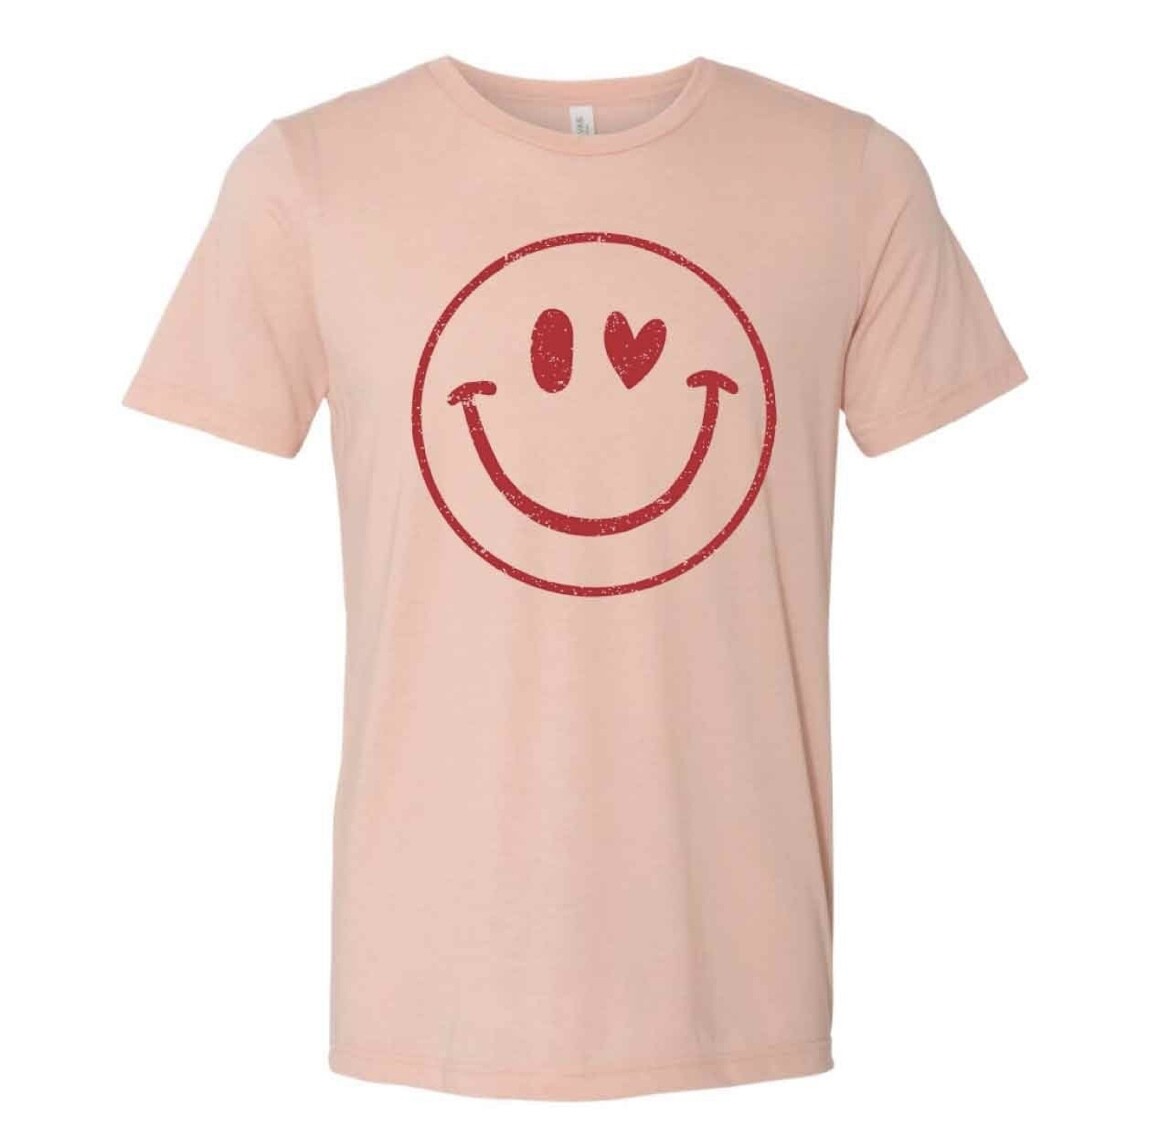 YOUTH WINKING HEART SMILEY FACE T-SHIRT